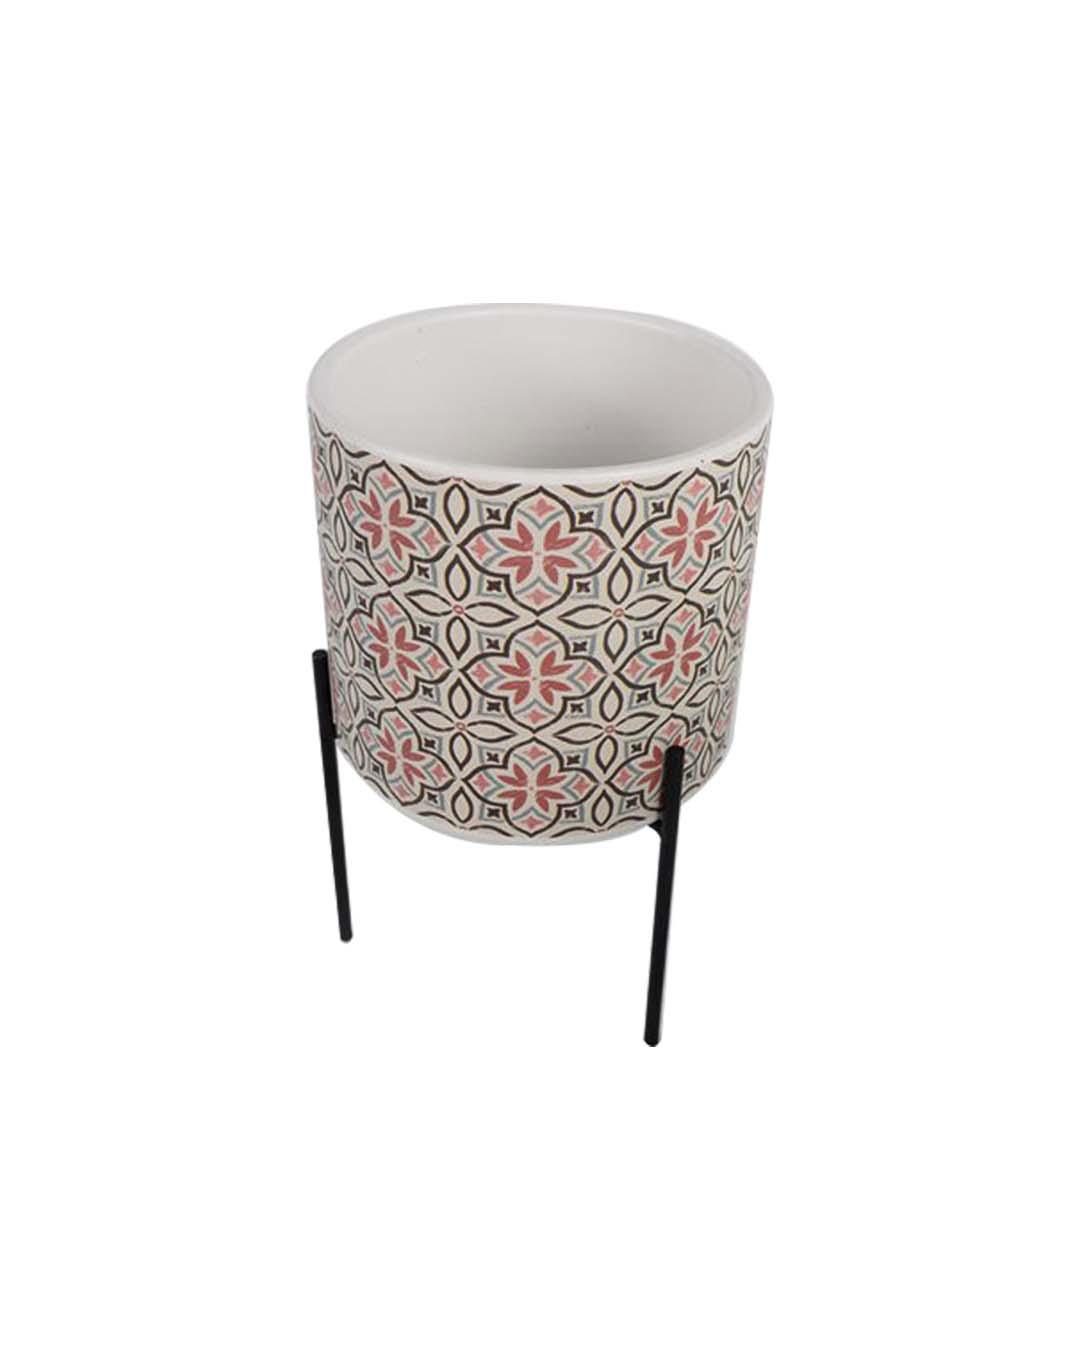 Table Planter with Stand, Multicolor, Ceramic - MARKET 99